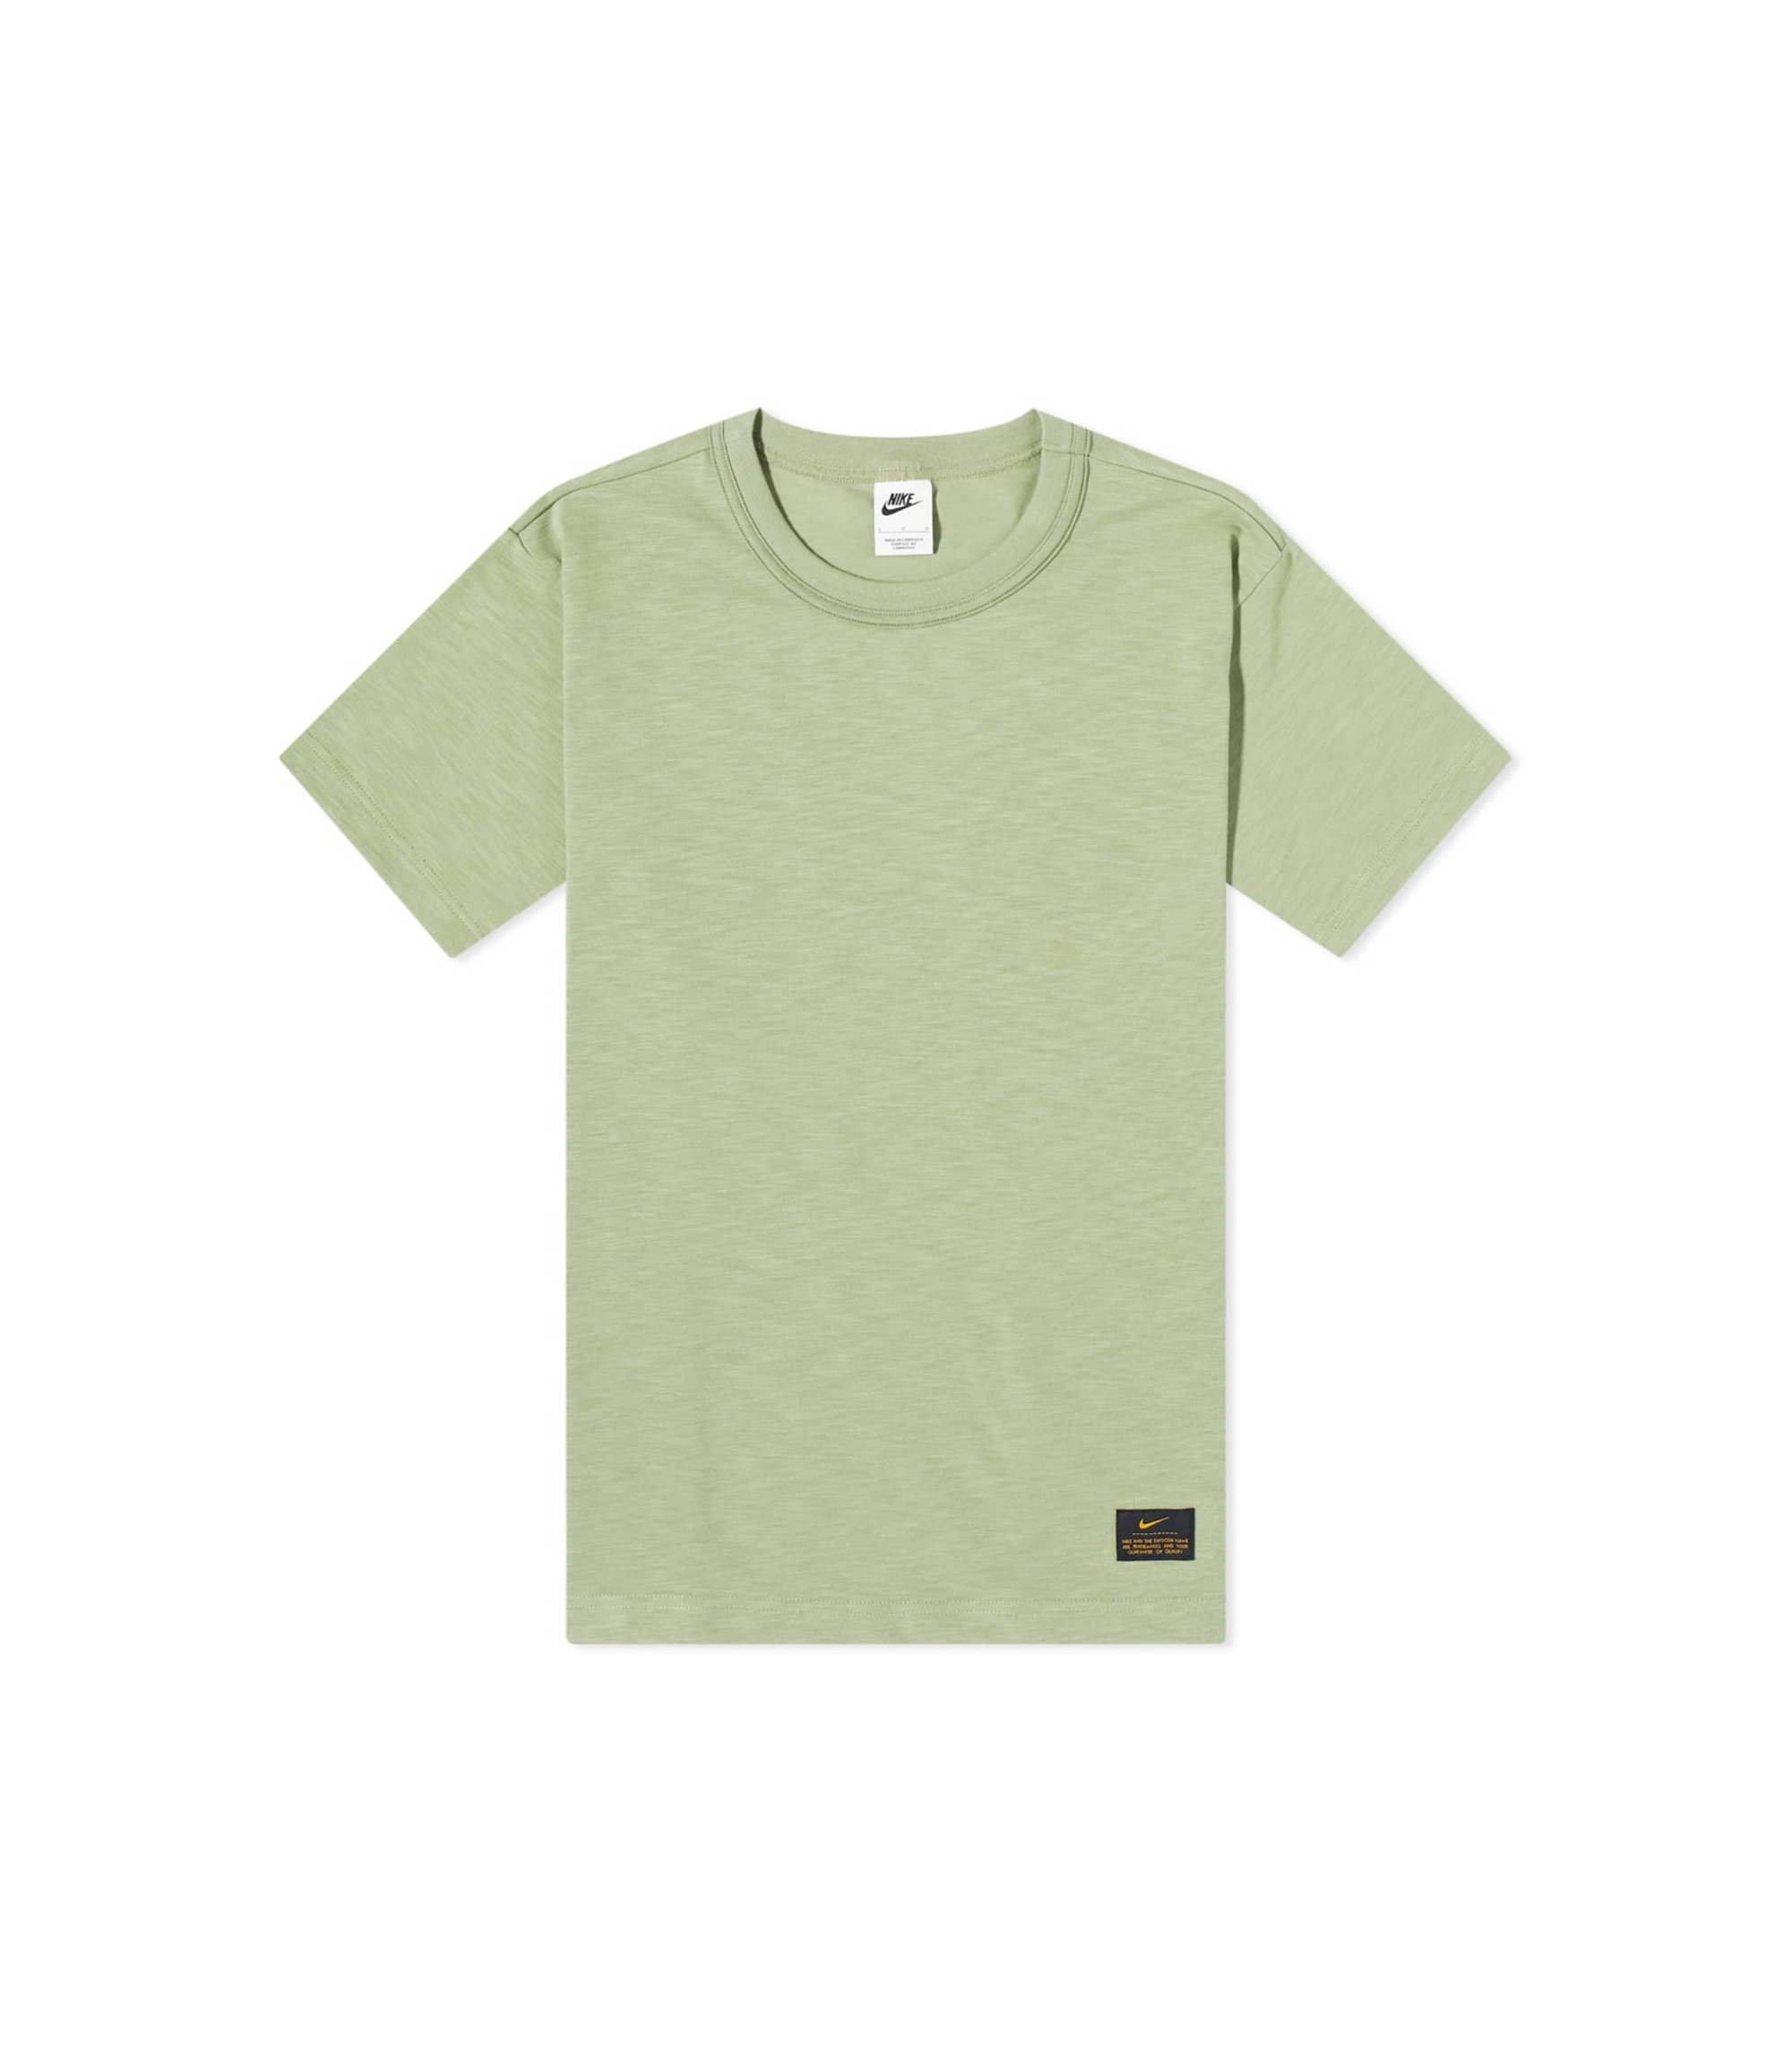 Life Knit T-shirt - OIL GREEN / NEUTRAL OLIVE